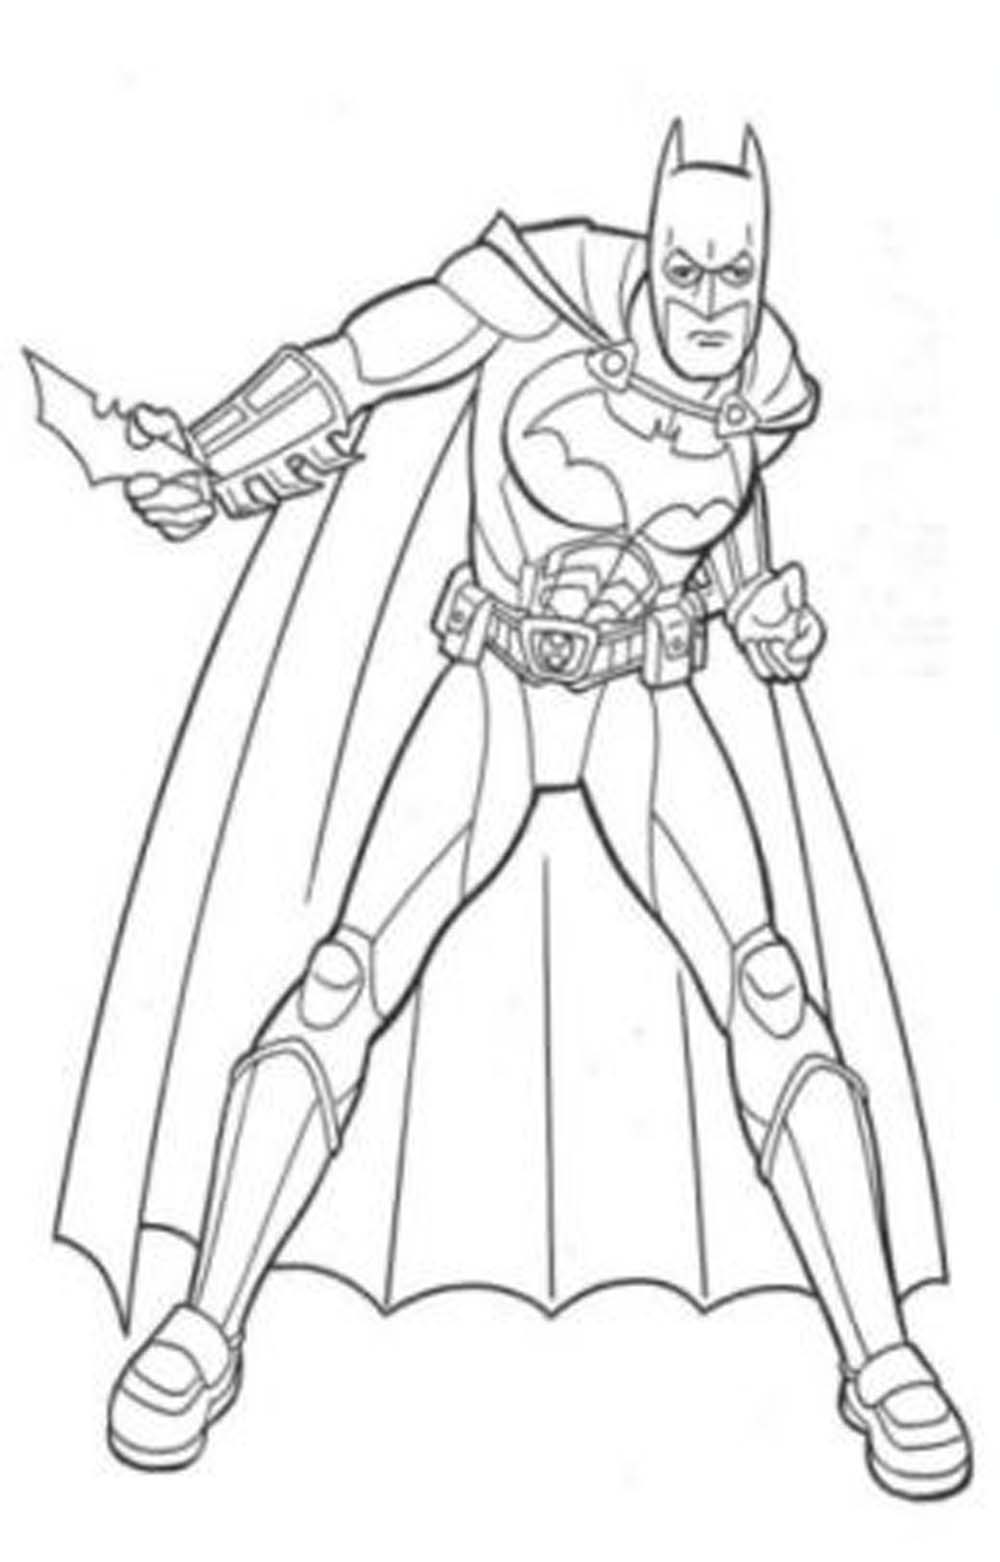 Print Download Batman Coloring Pages for Your Children